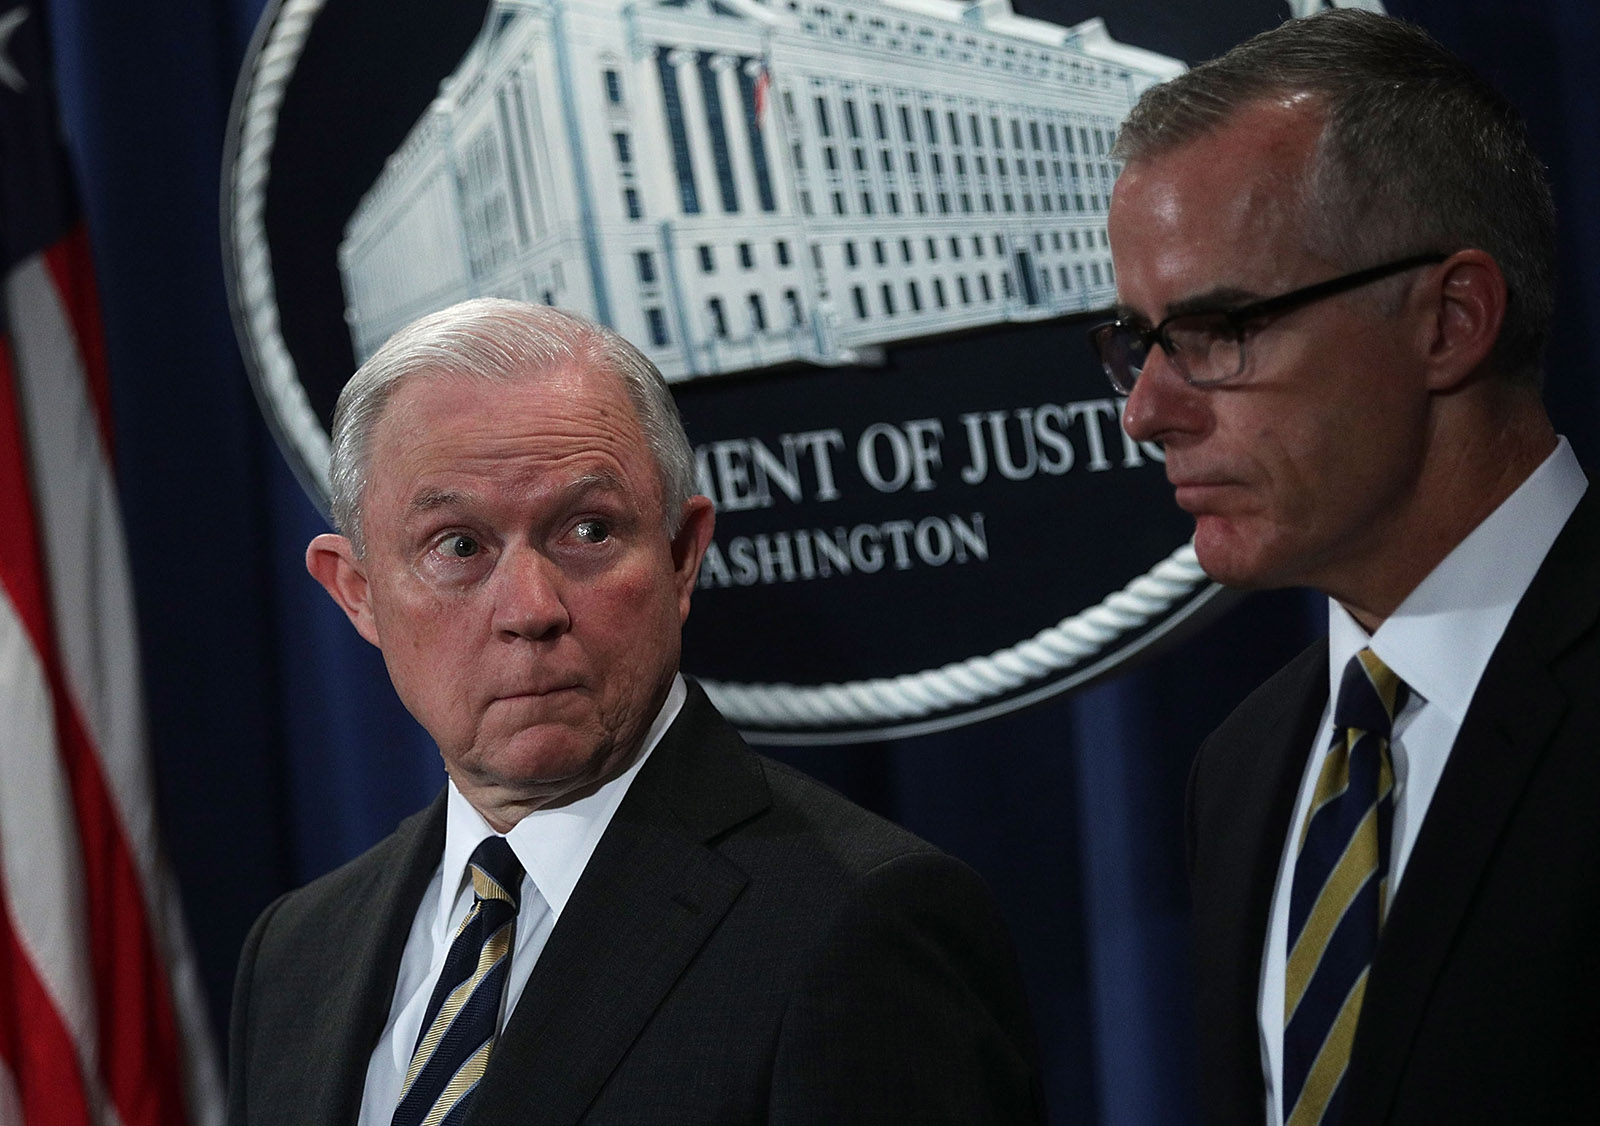 Former Attorney General Jeff Sessions and Acting FBI Director Andrew McCabe during a news conference at the Justice Department, Washington, D.C., July 13, 2017 